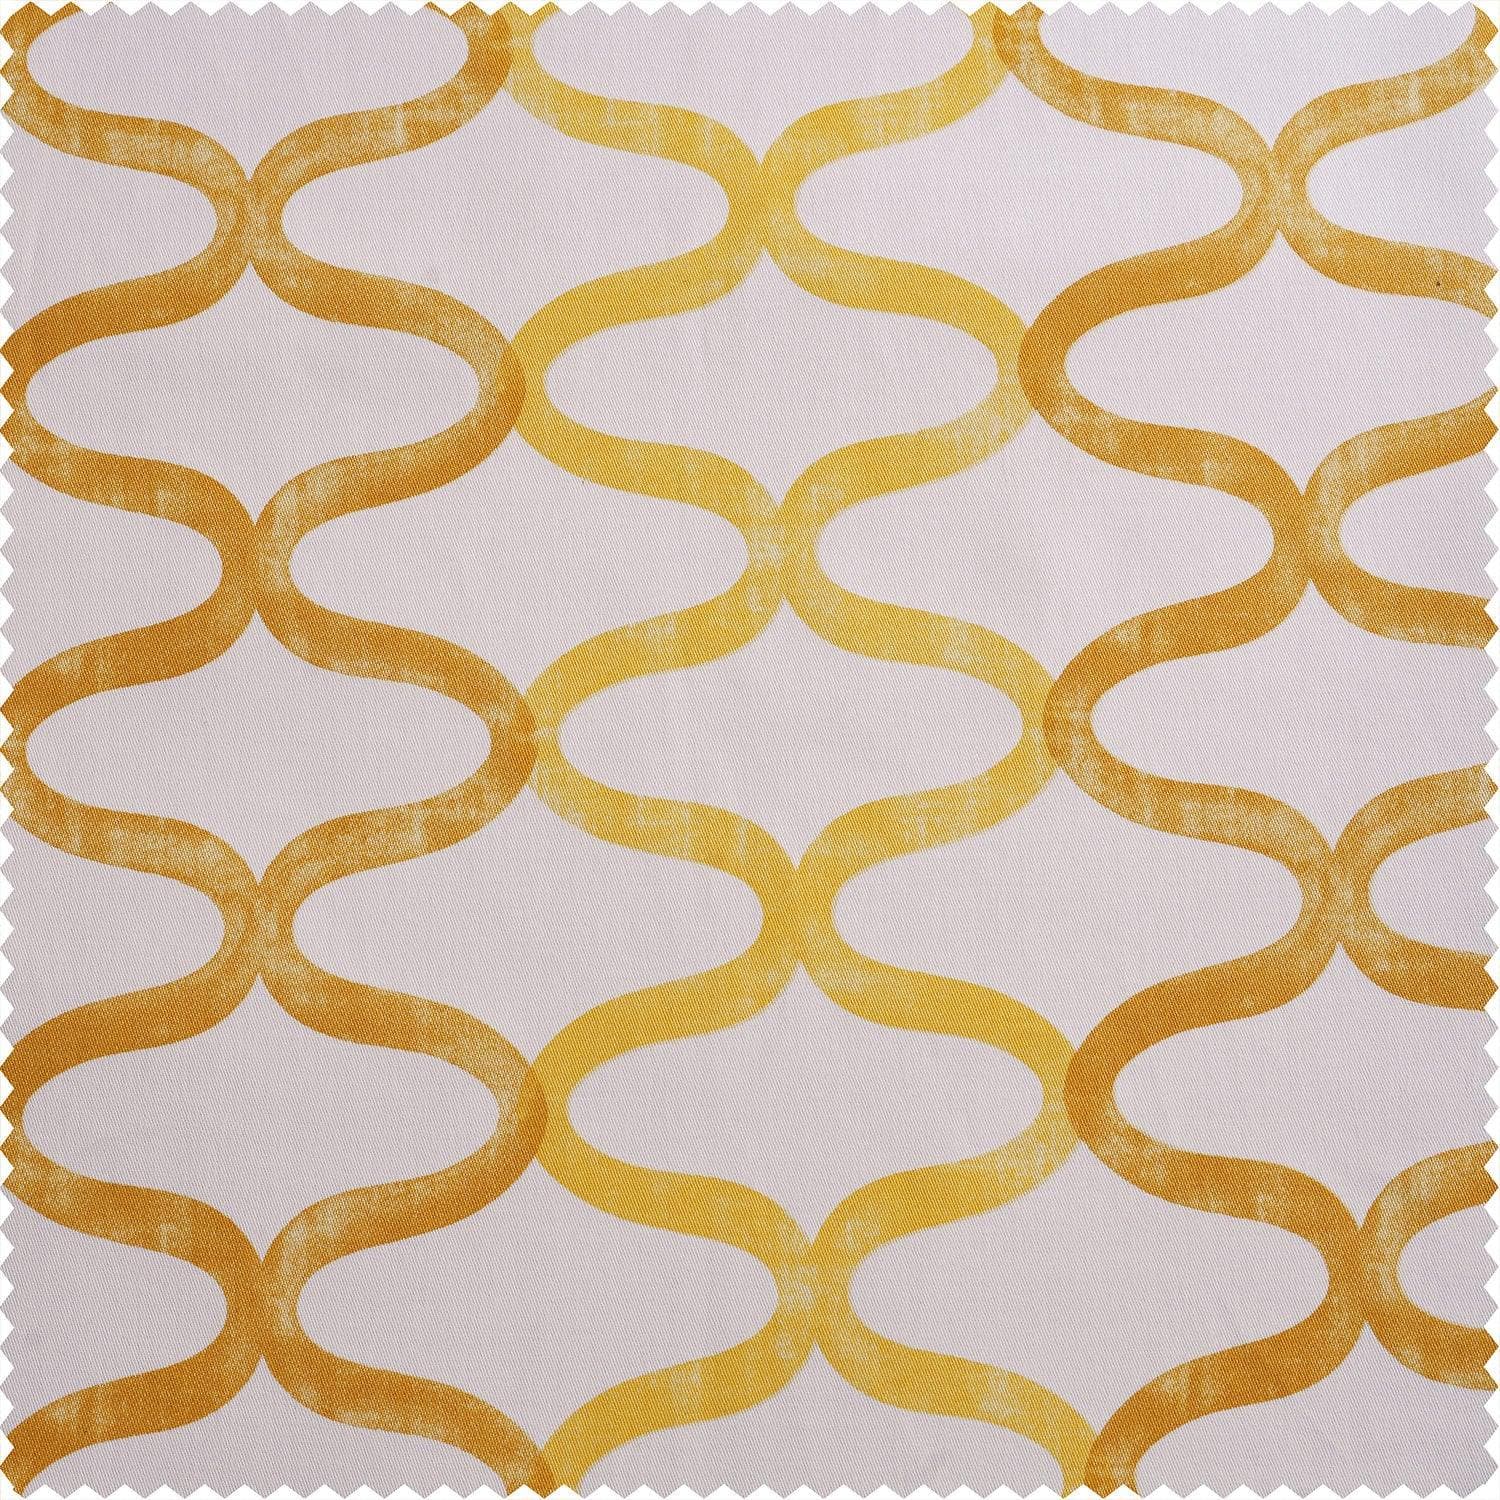 Illusions Yellow Printed Cotton Blackout Swatch